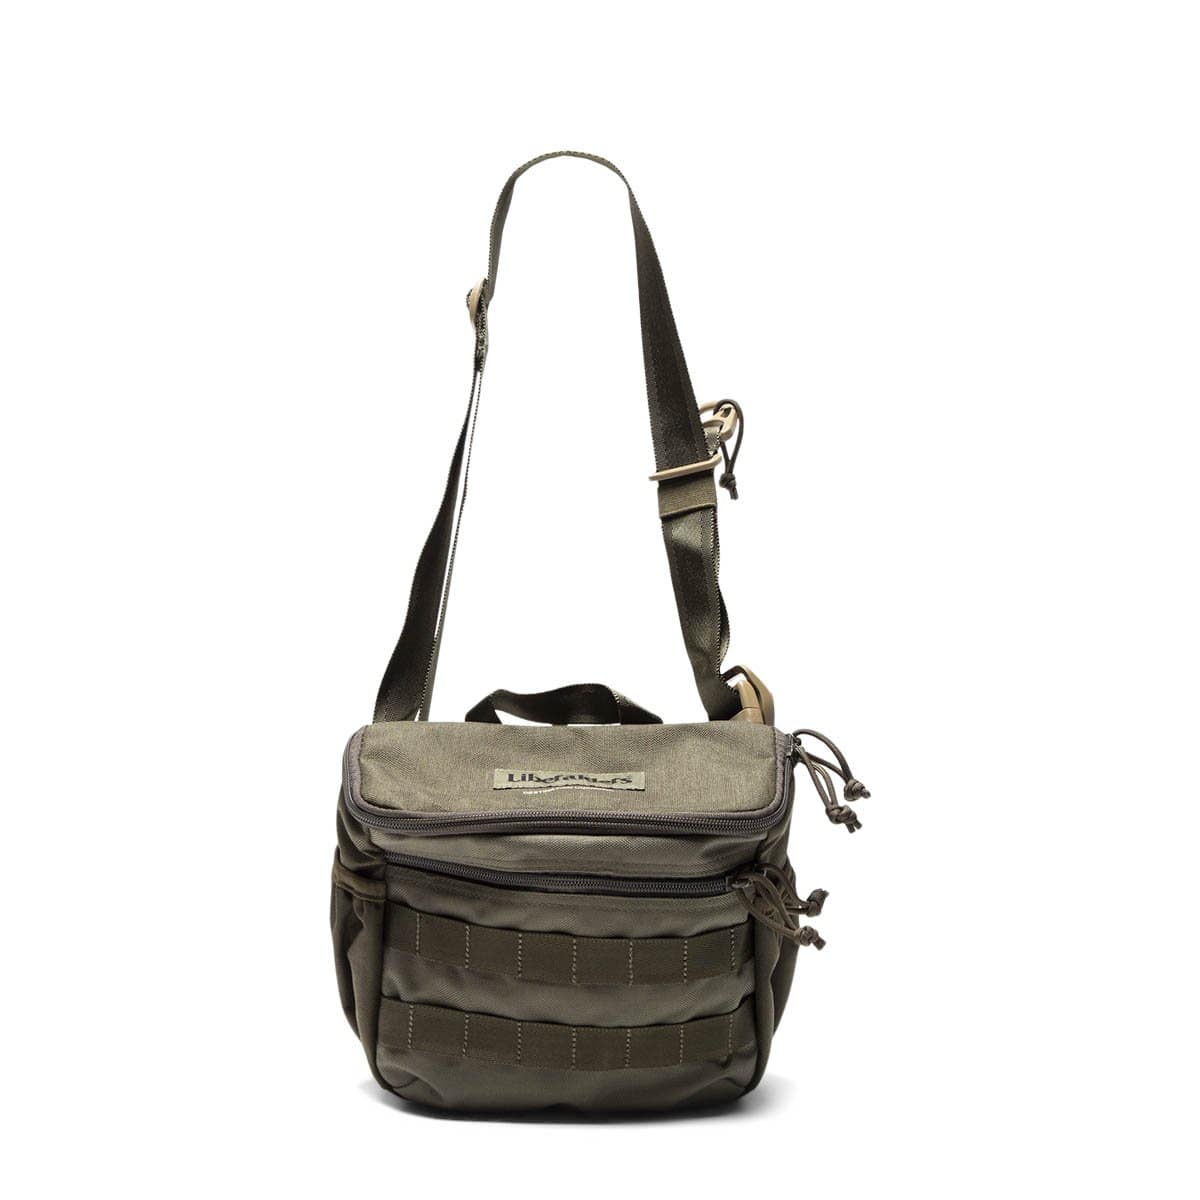 Liberaiders Bags & Accessories OLIVE / OS TRAVELIN' SOLDIER SHOULDER BAG